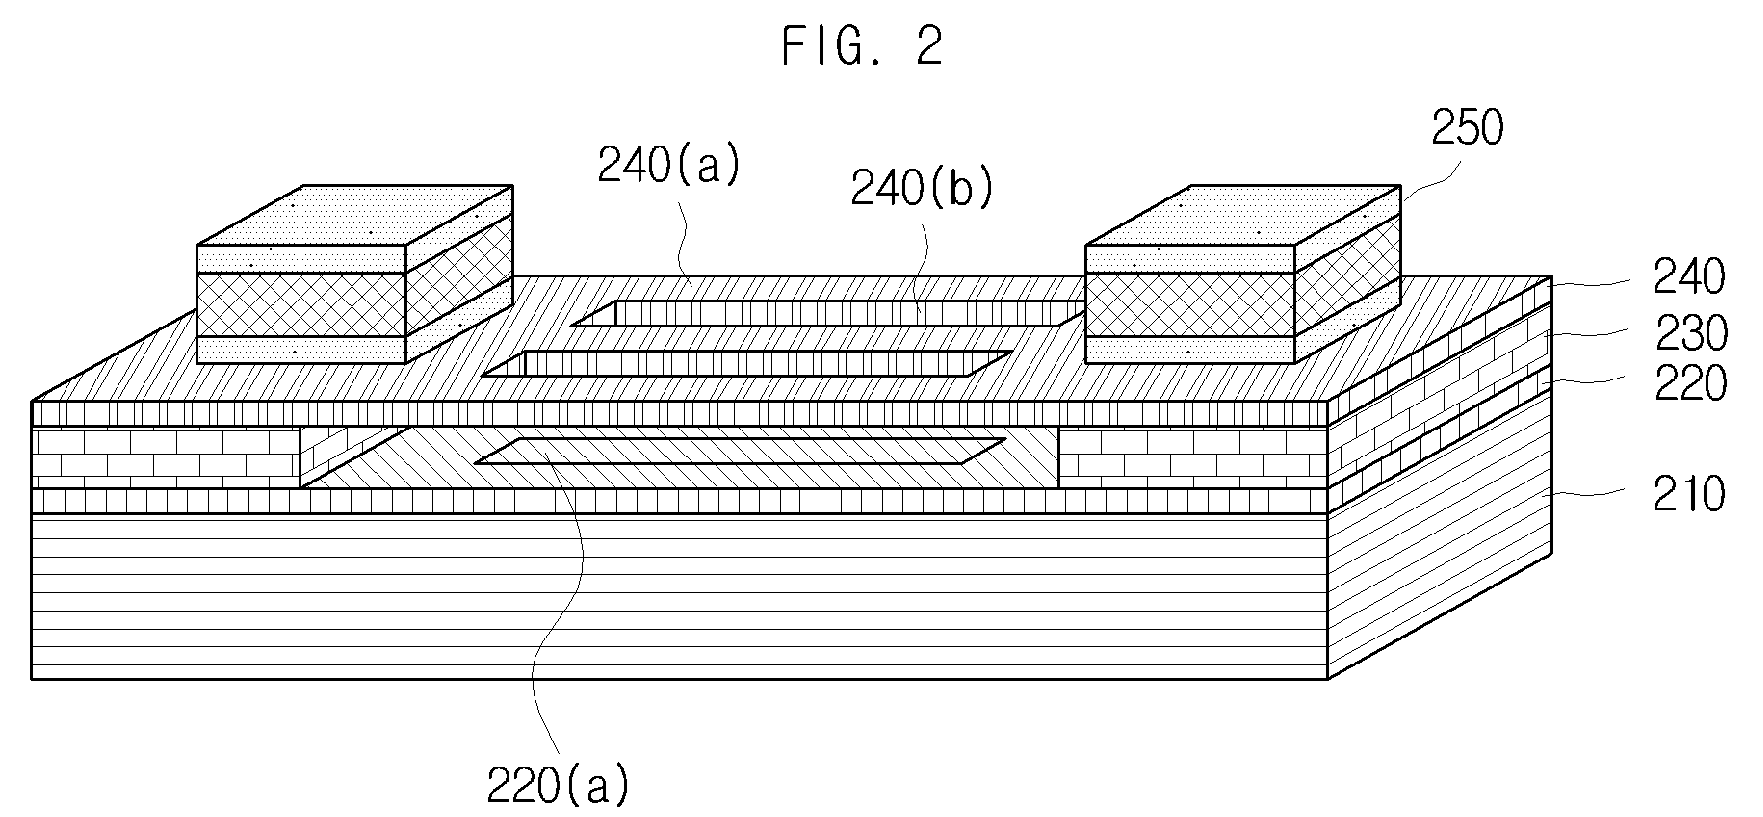 Display device and method using laser light sources and record media recoded program realizing the same